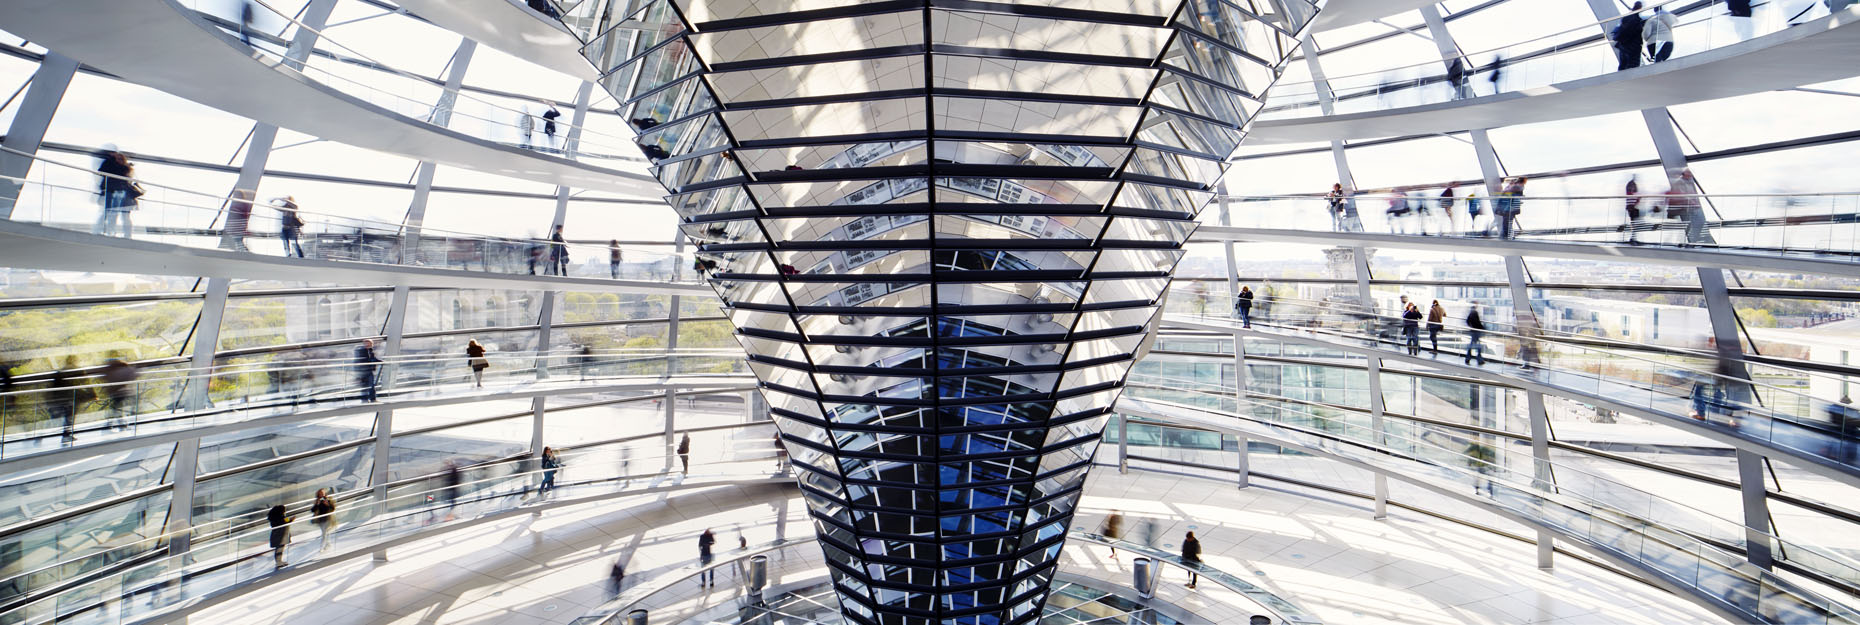 The Reichstag shot for The Ritz-Carlton, Berlin | Germany | 